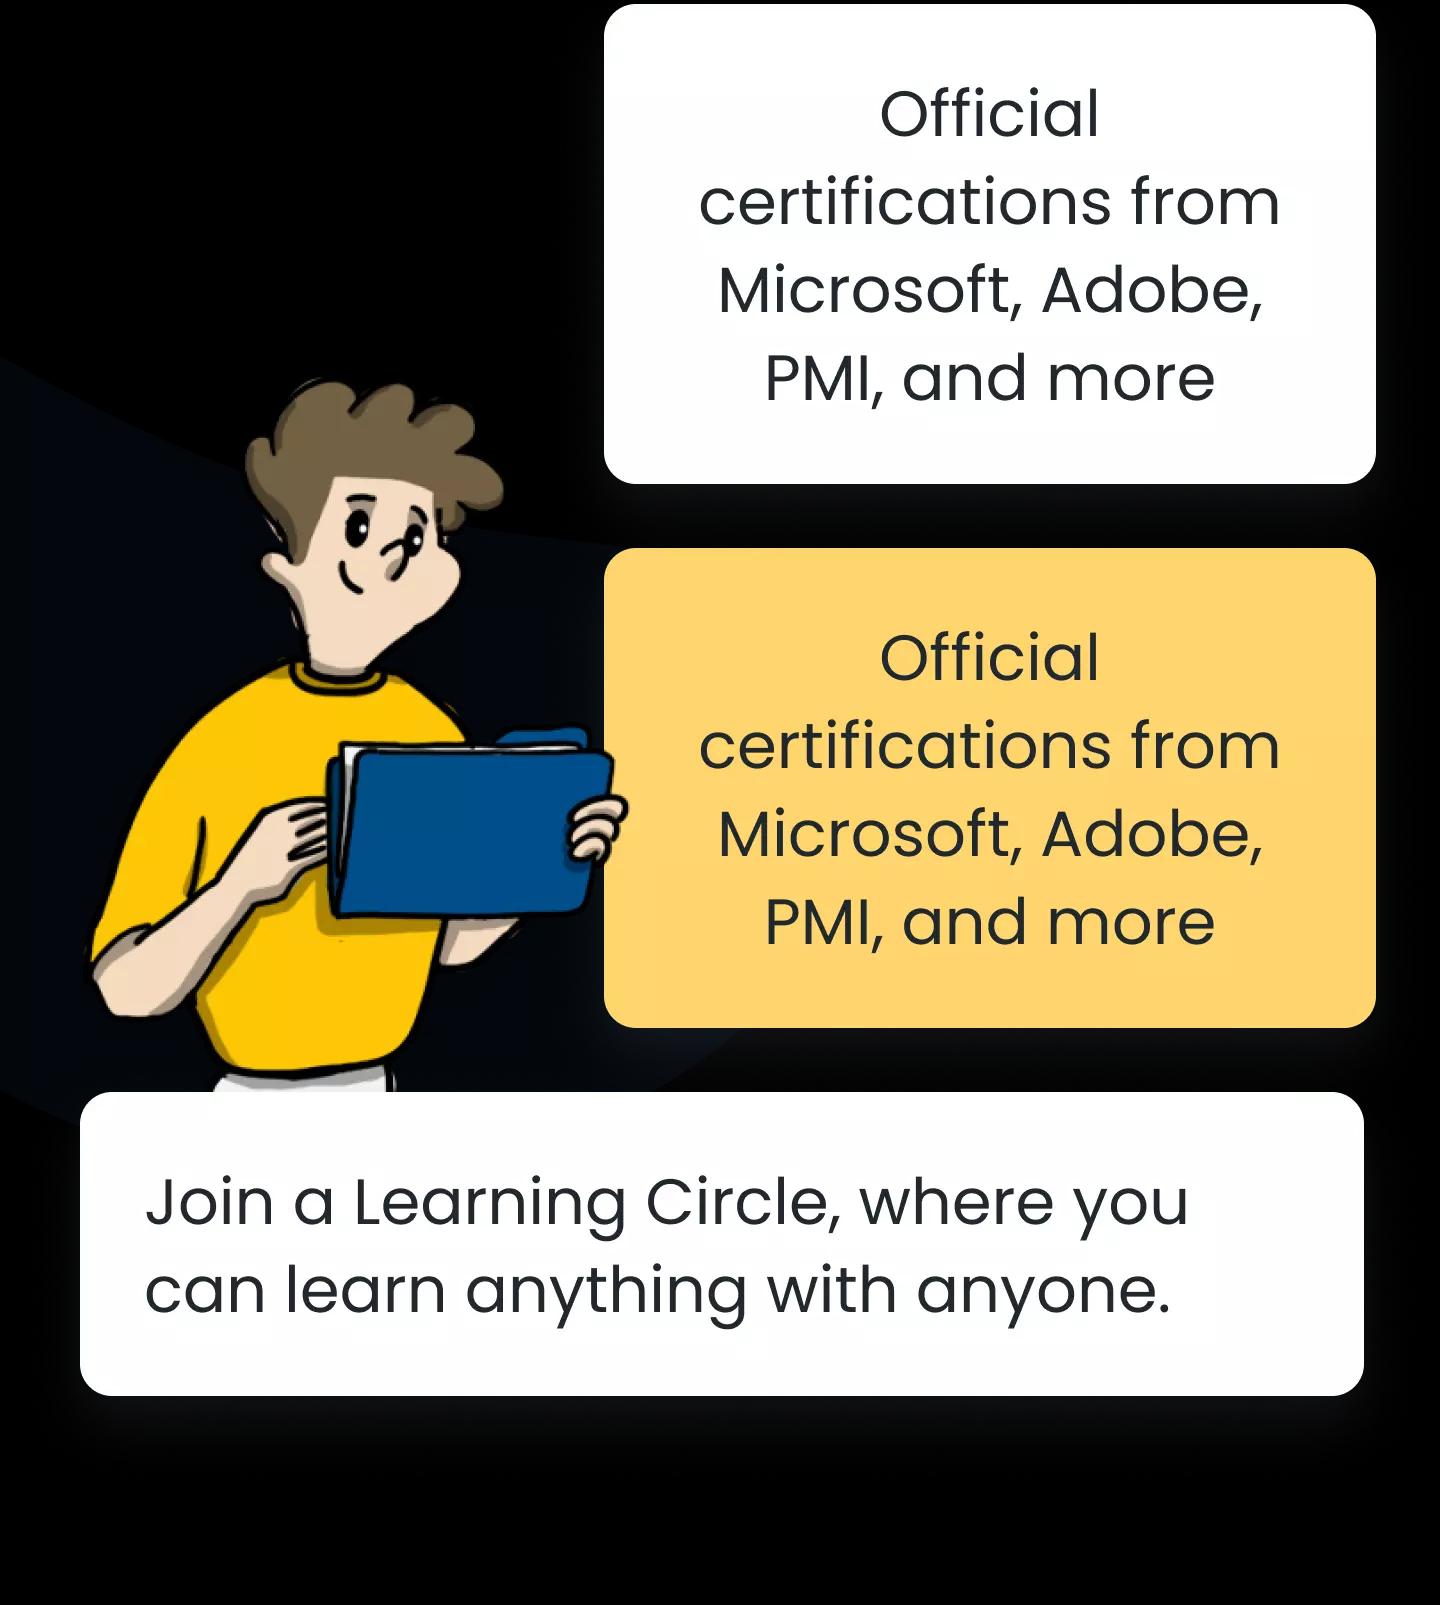 Why certify with MES?